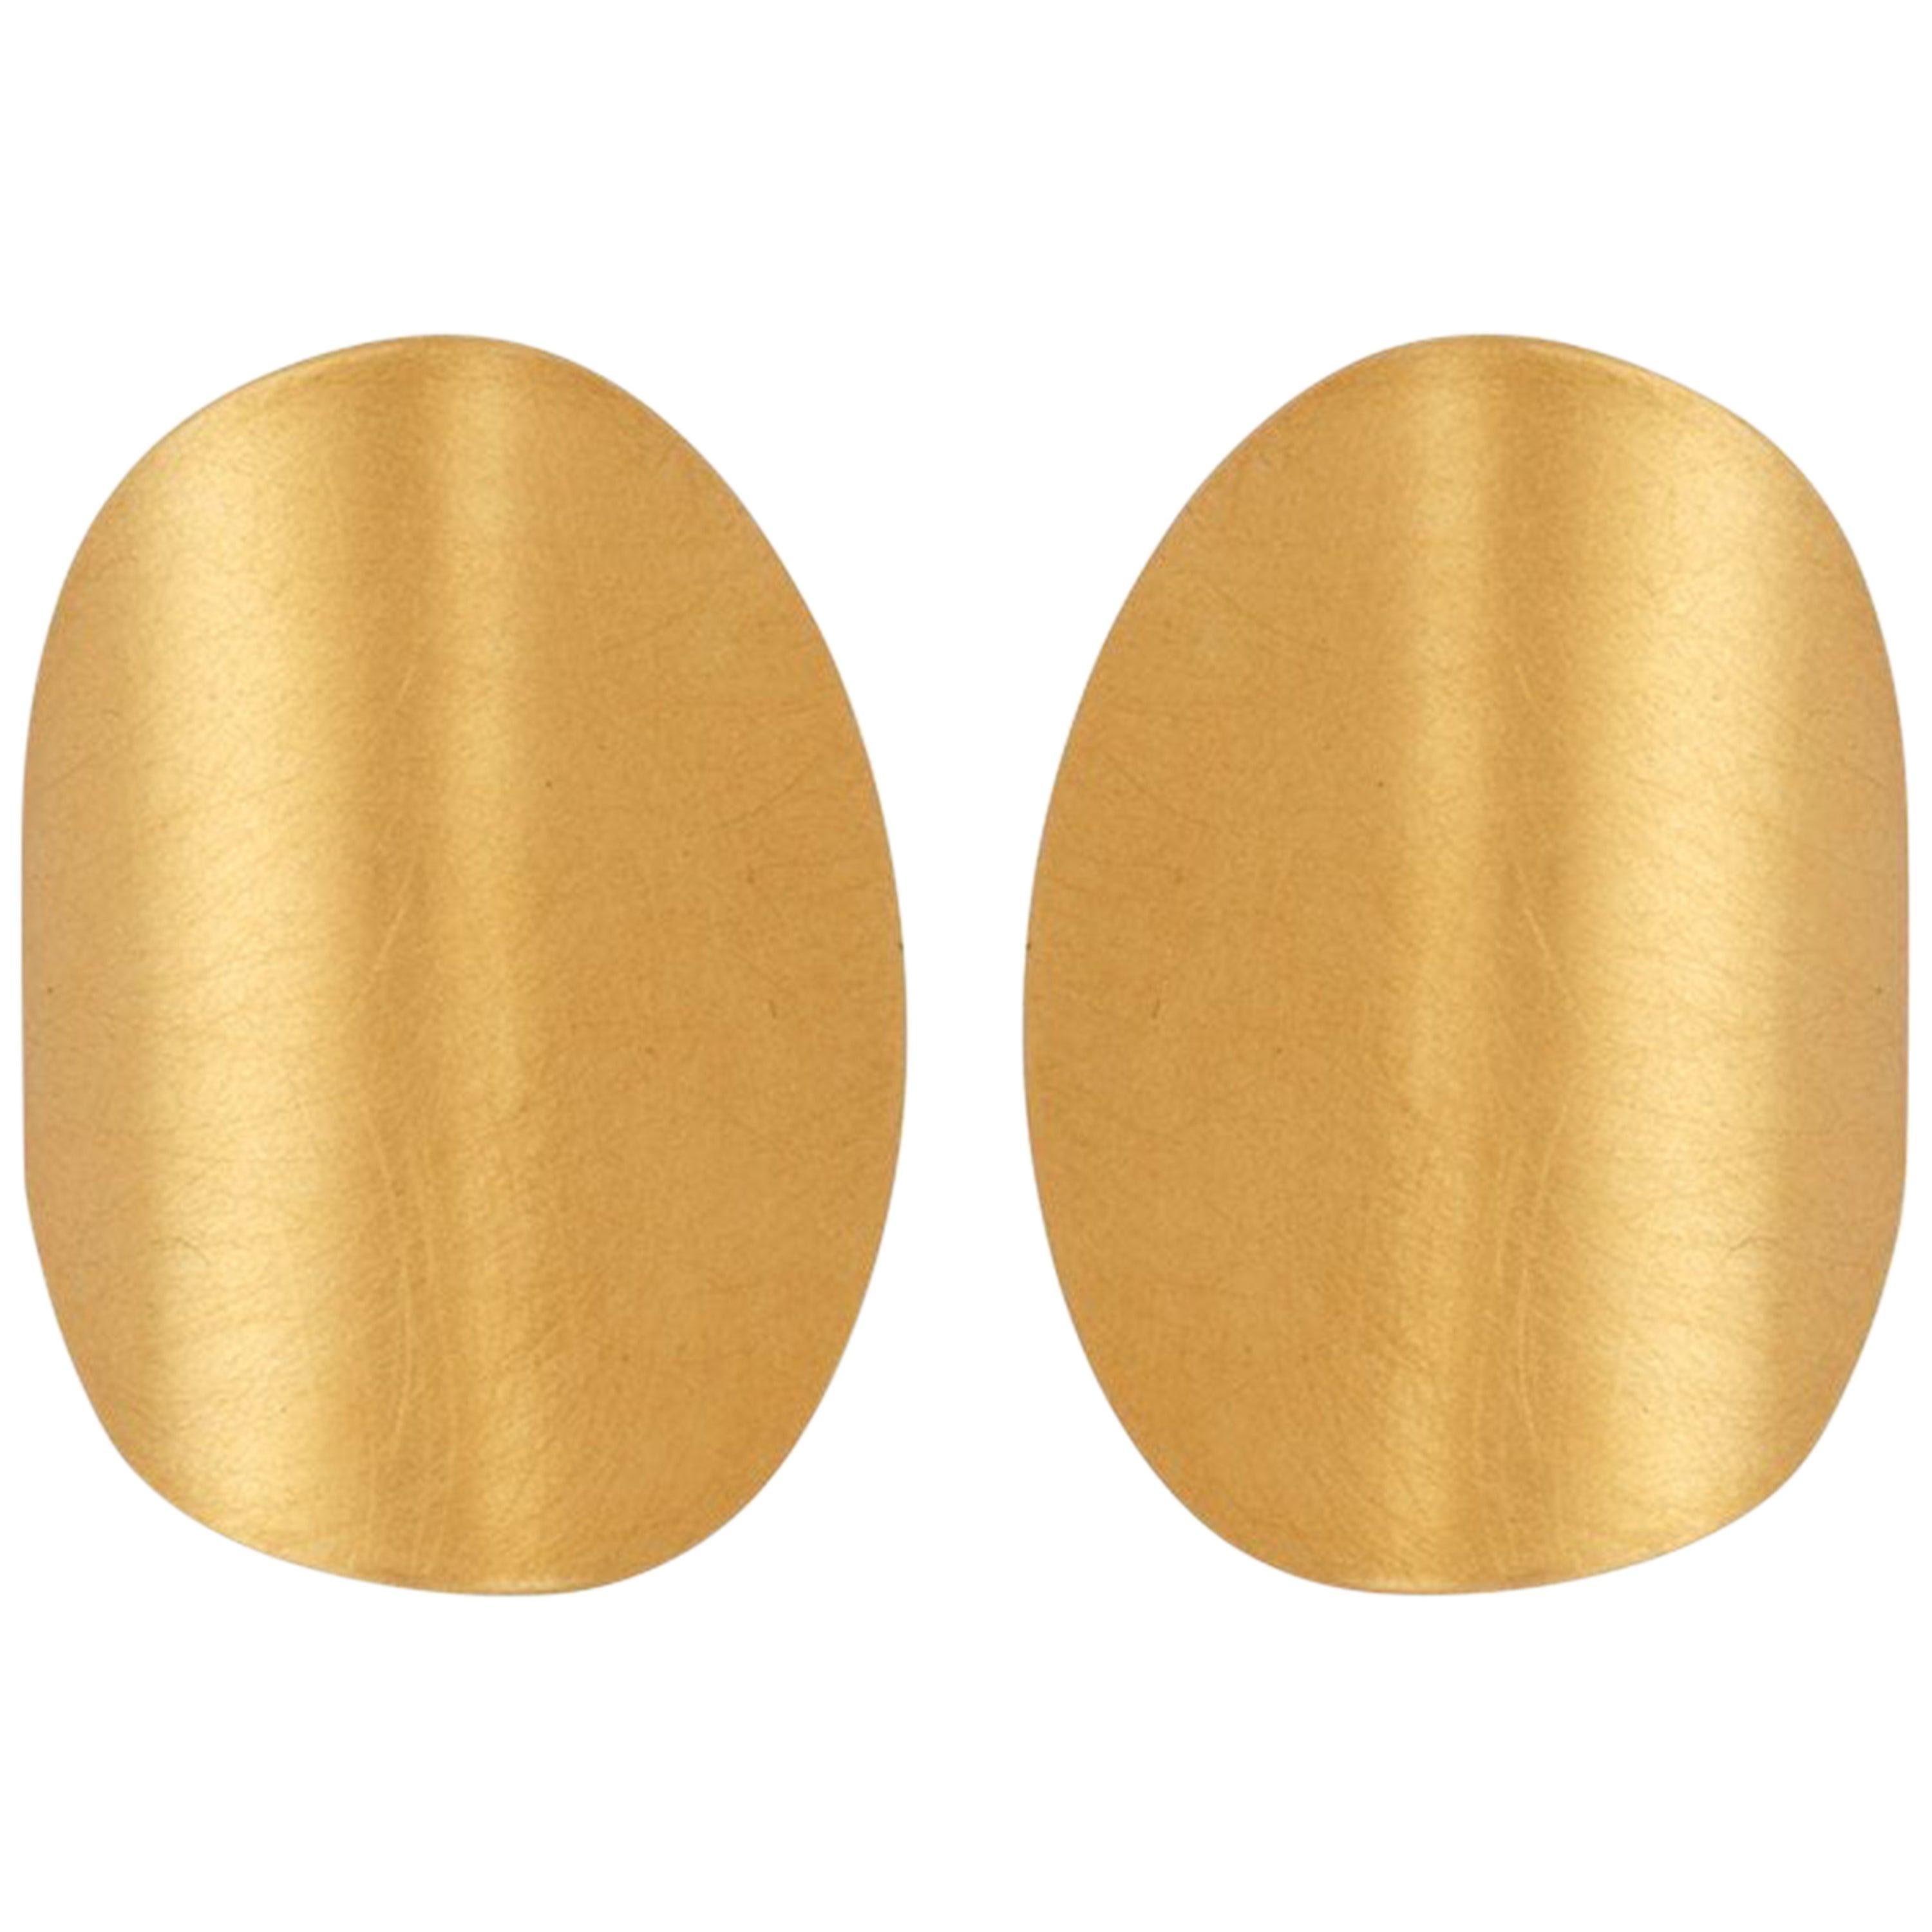  Sterling Silver Gold-Plated Folding Disk Curve Earrings